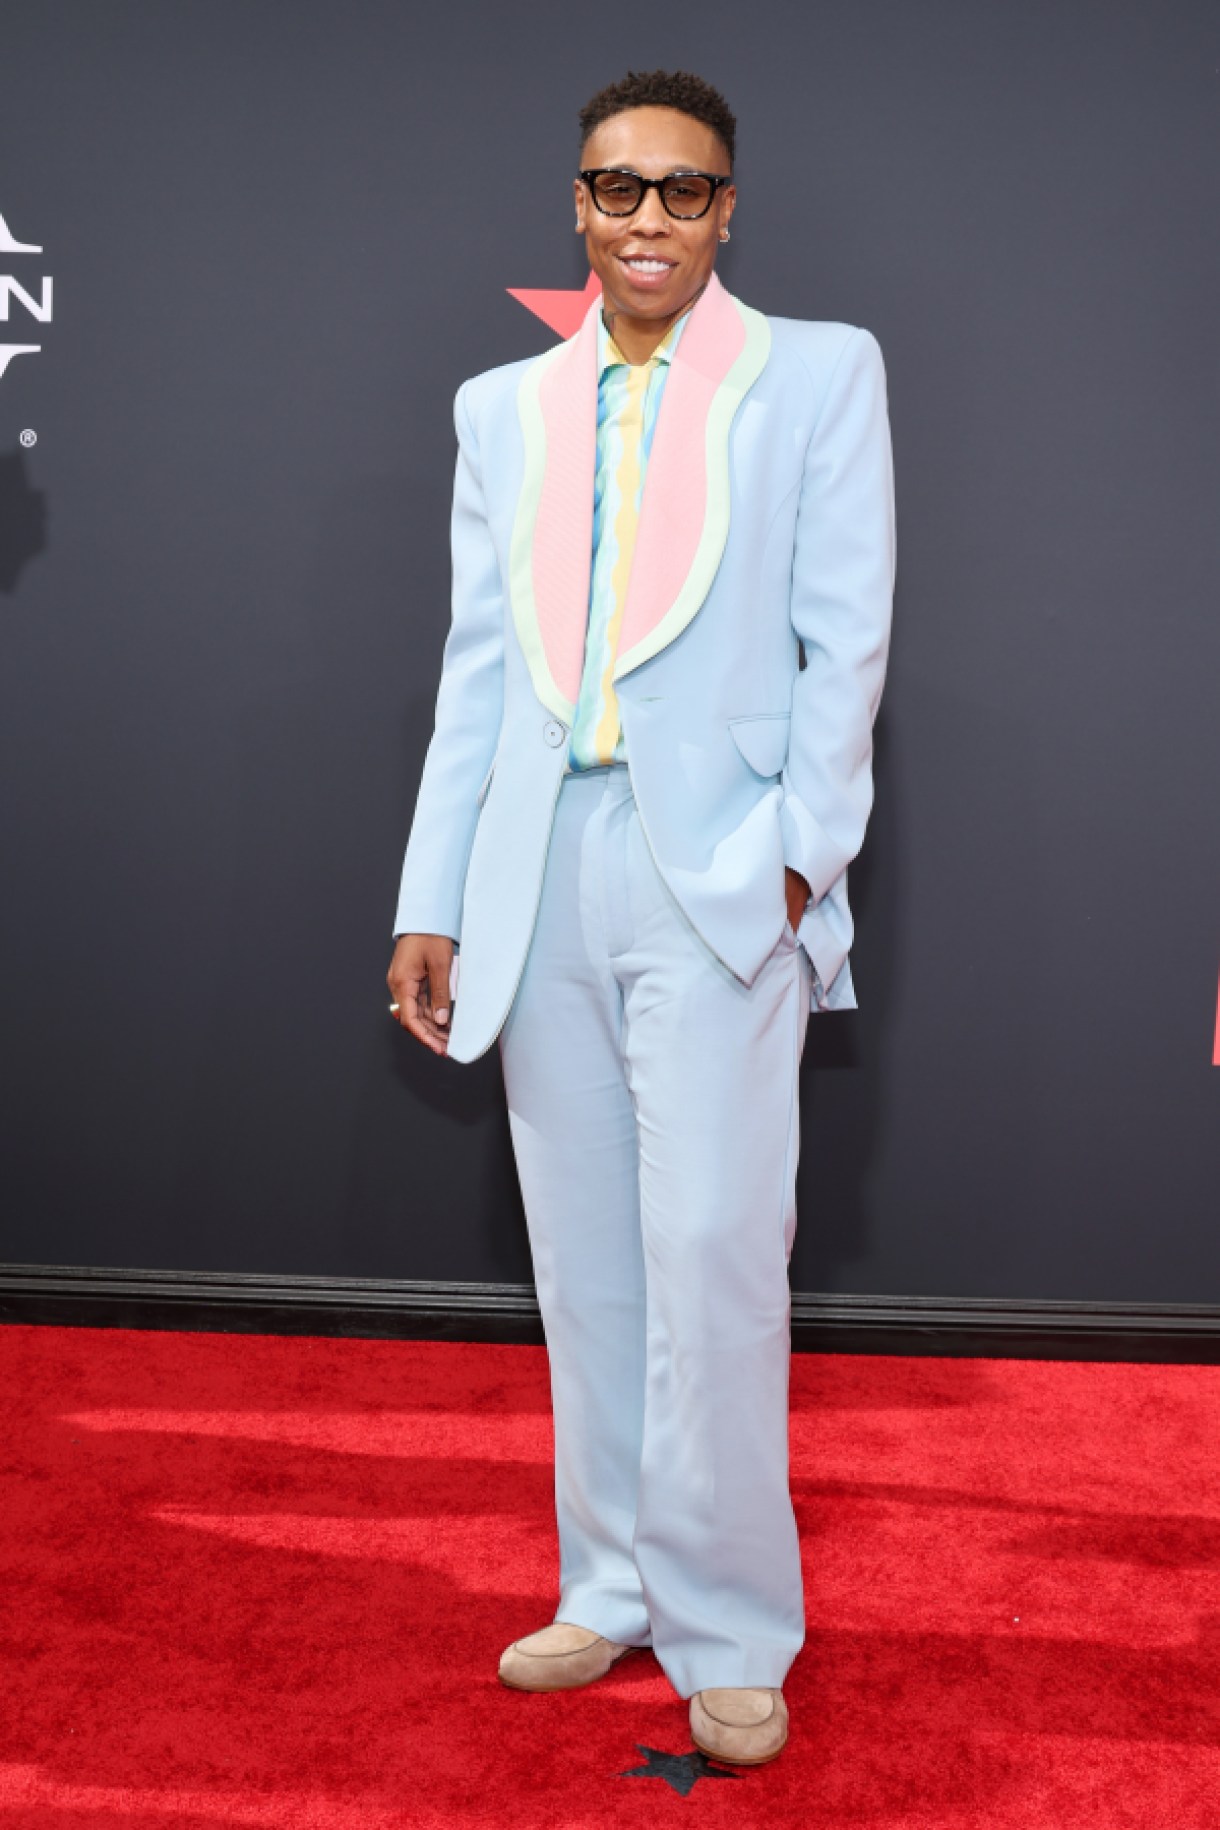 LOS ANGELES, CALIFORNIA - JUNE 26: Lena Waithe attends the 2022 BET Awards at Microsoft Theater on June 26, 2022 in Los Angeles, California. (Photo by Amy Sussman/Getty Images,)